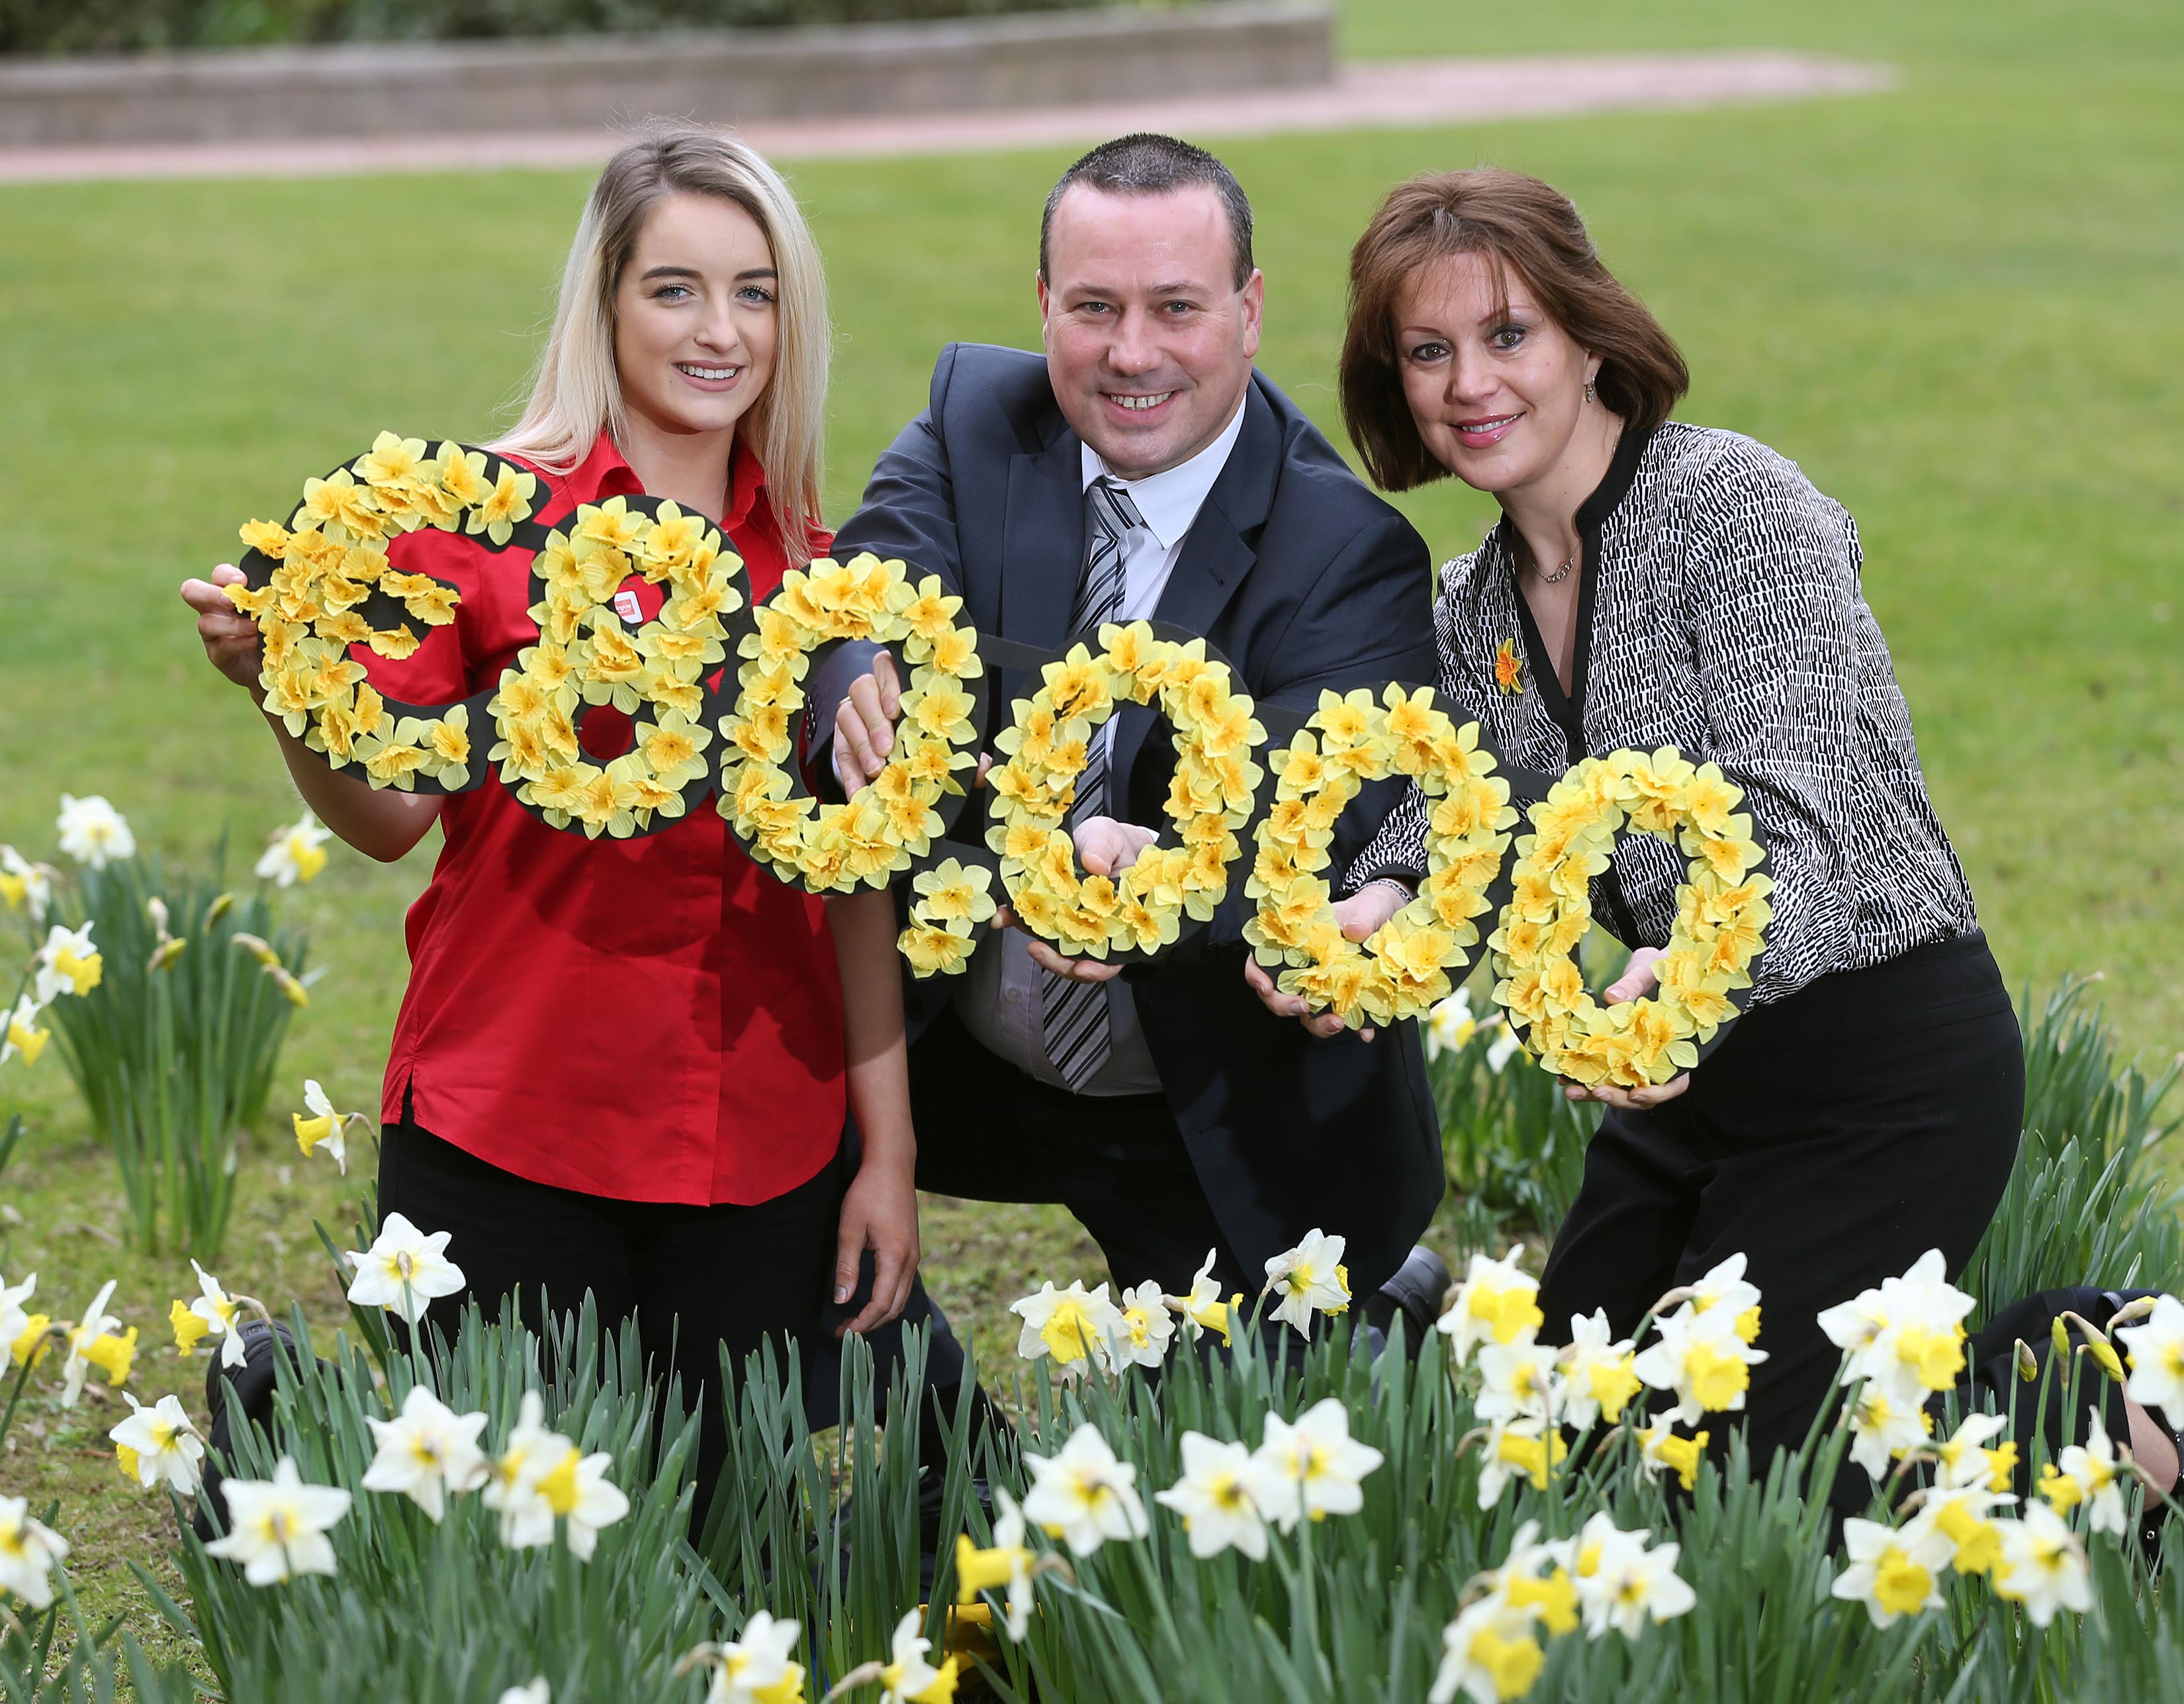 No Repro Fee. Donna Campbell, from Argos (left) with Des Bartnett, Charity Partnership Manager, Argos and Bernie Healy, Daffodil Centre Cancer Nurse at St. James Hospital, pictured at the announcement of €80,000.00 funds raised in the last twelve months by Argos making the nationwide general retailer one of the Irish Cancer Society’s fastest growing ‘charity-of-the-year’ partnerships to date. The money raised will fund 3,000 nursing hours at the Irish Cancer Society’s hospital-based Daffodil Centres for people affected by cancer in Ireland, providing cancer information, support and advice in local communities. Pic. Robbie Reynolds